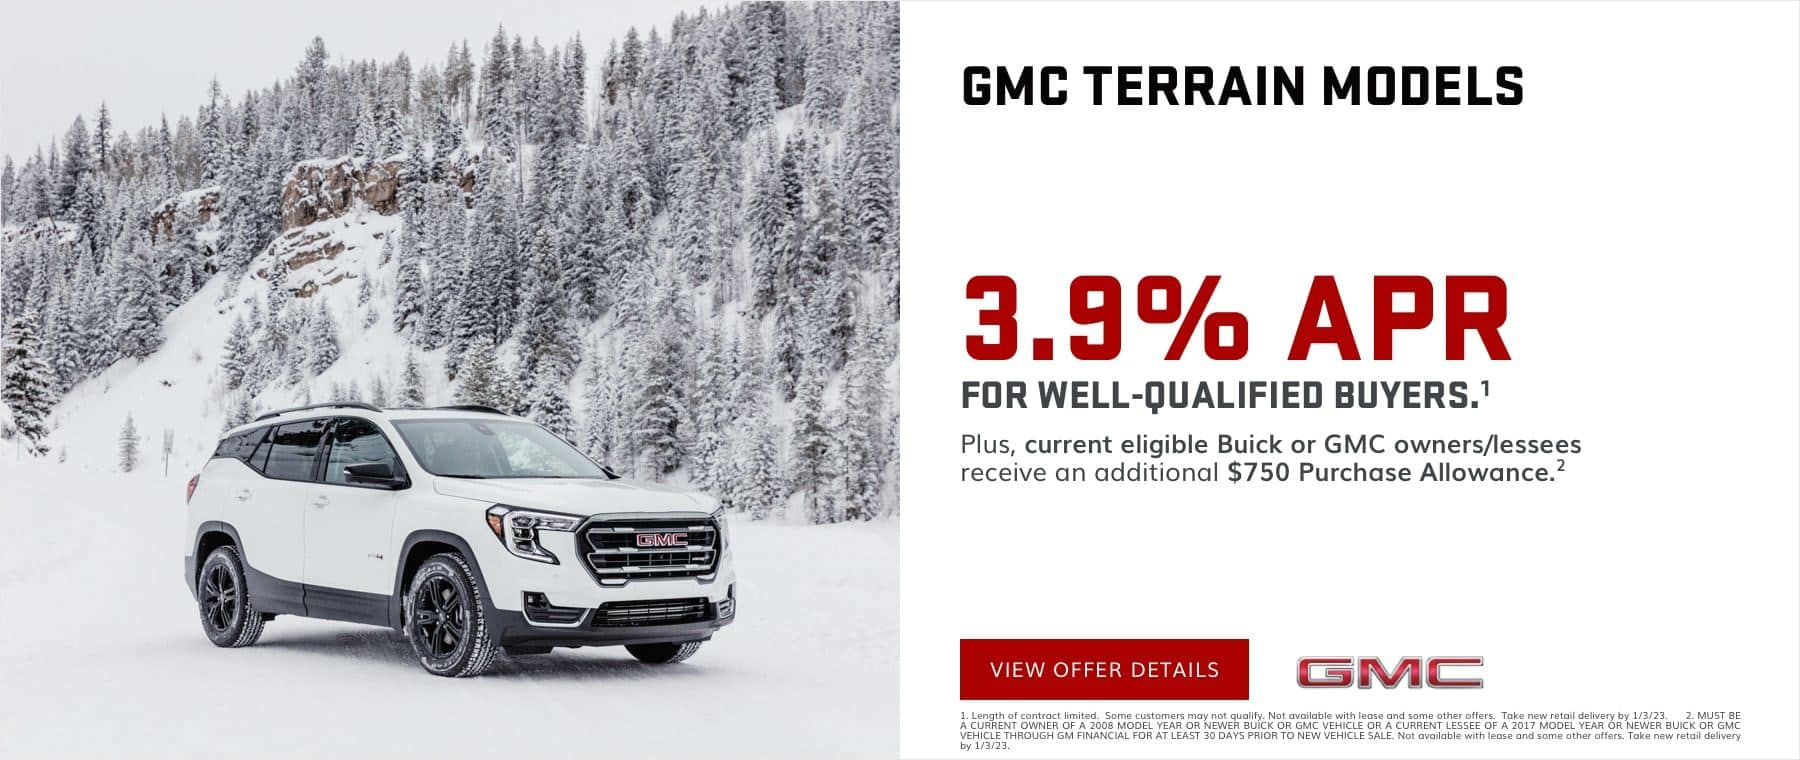 3.9% APR for 72 months for well-qualified buyers.1 Plus, current eligible Buick or GMC owners/lessees receive an additional $750 Purchase Allowance.2